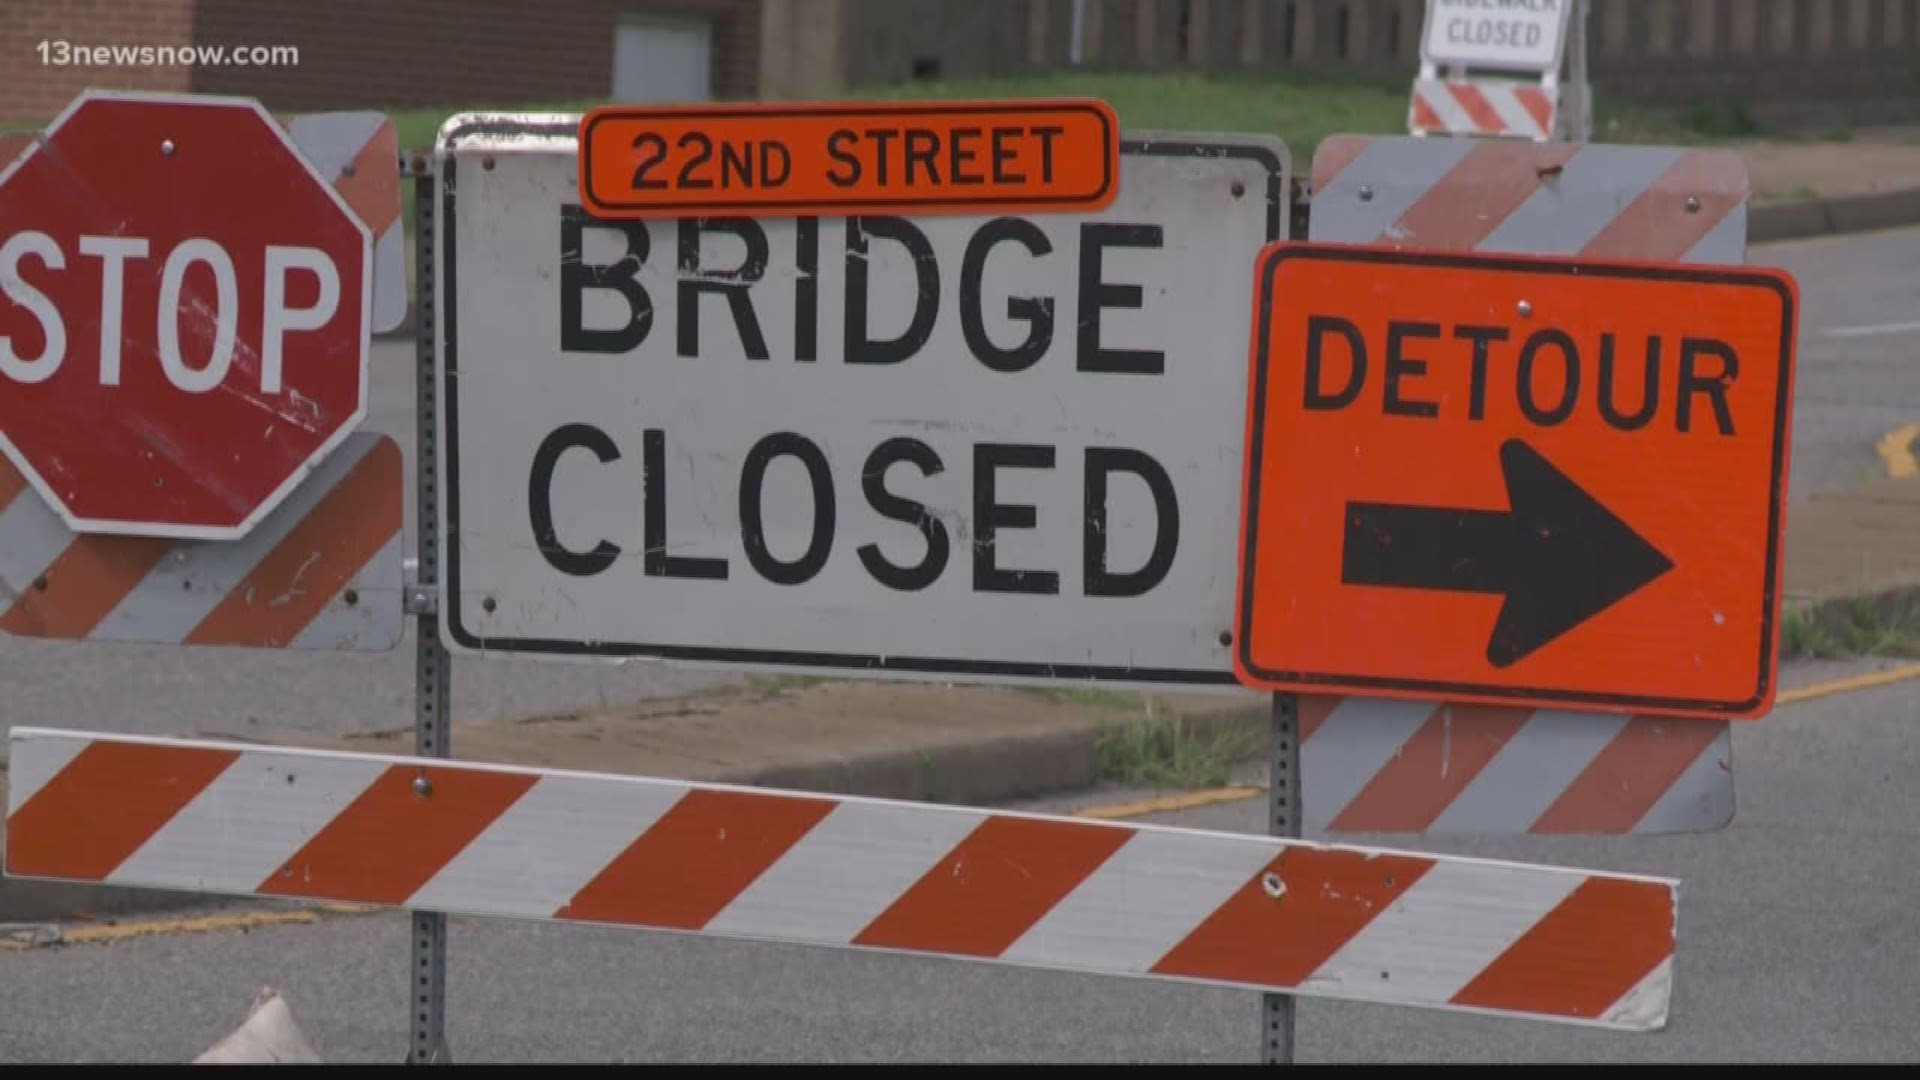 The 22nd Street Bridge in Chesapeake was abruptly closed Wednesday after public works crews discovered serious deterioration during their annual inspection.